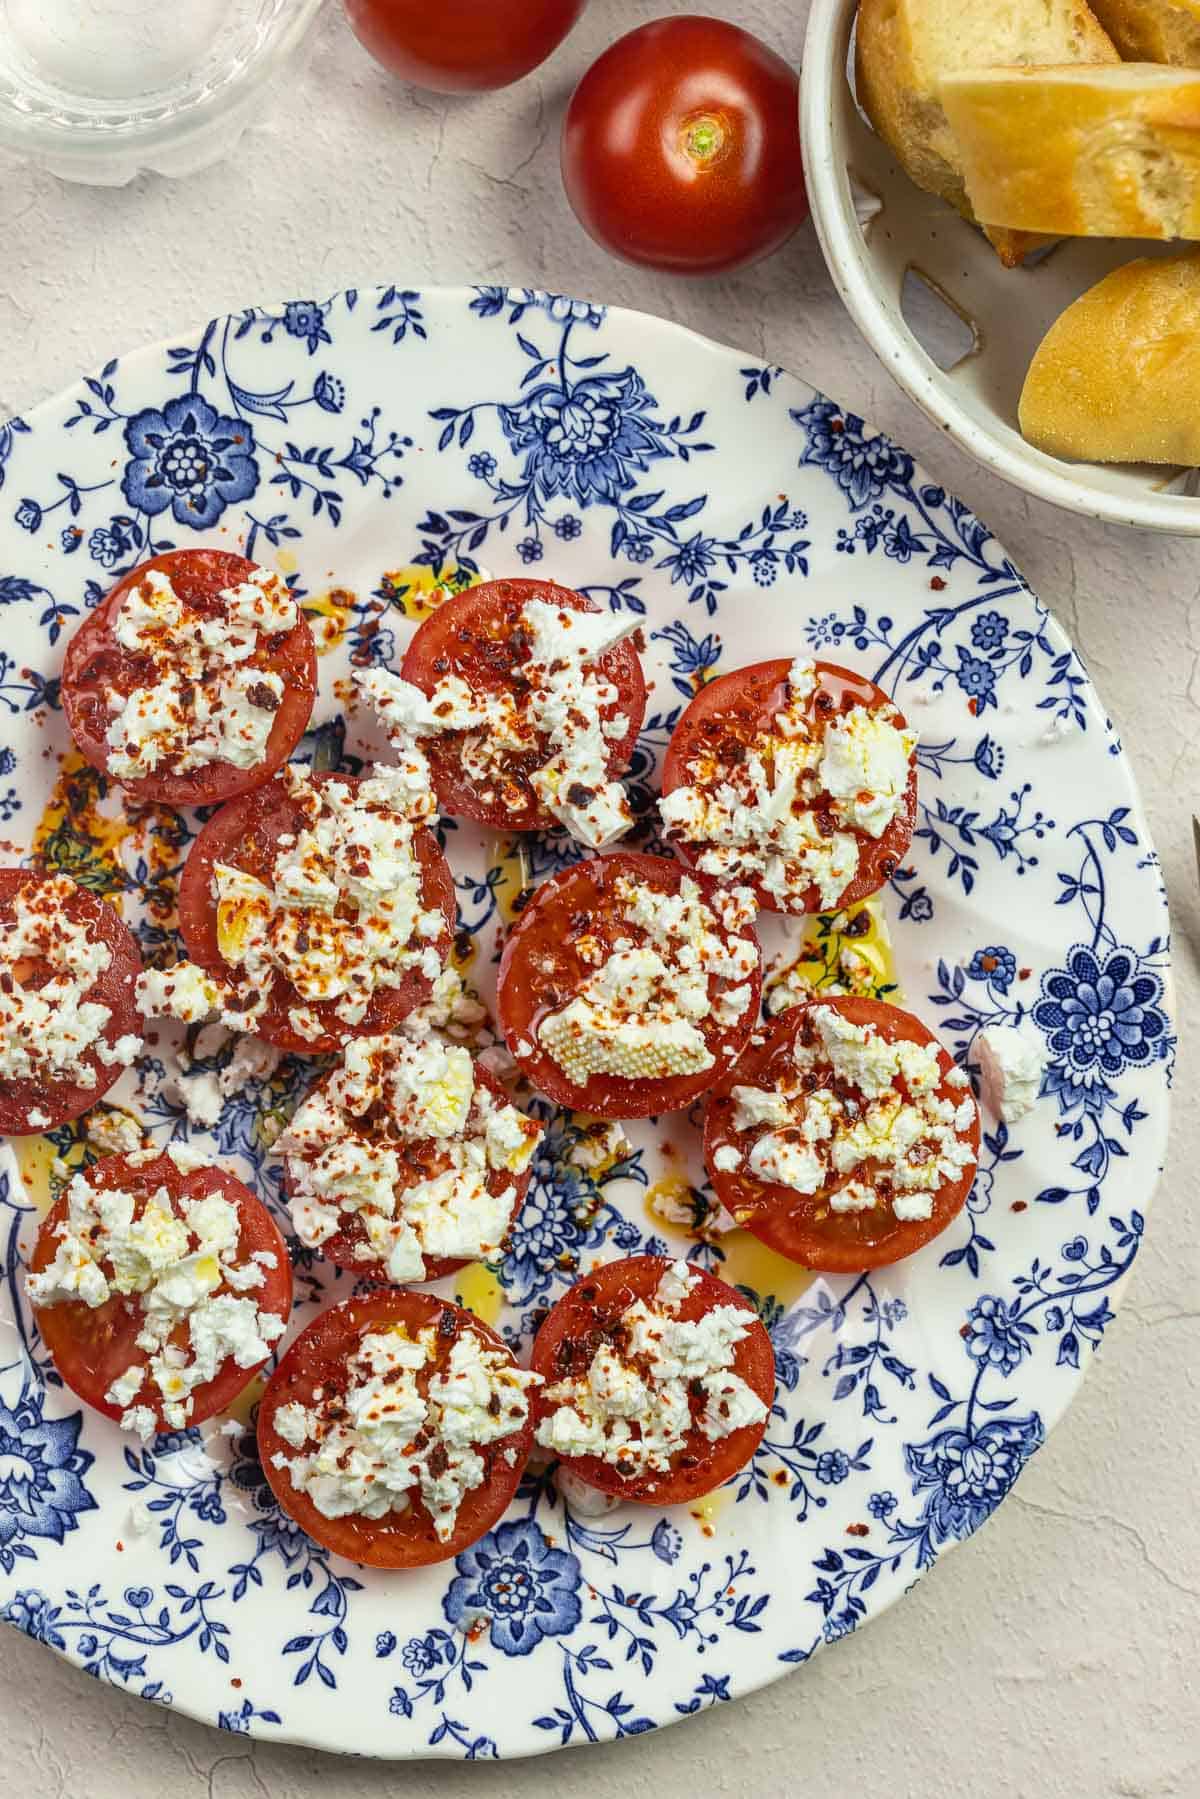 Tomato halves with feta crumbled feta on a blue and white plate with a side of bread slices